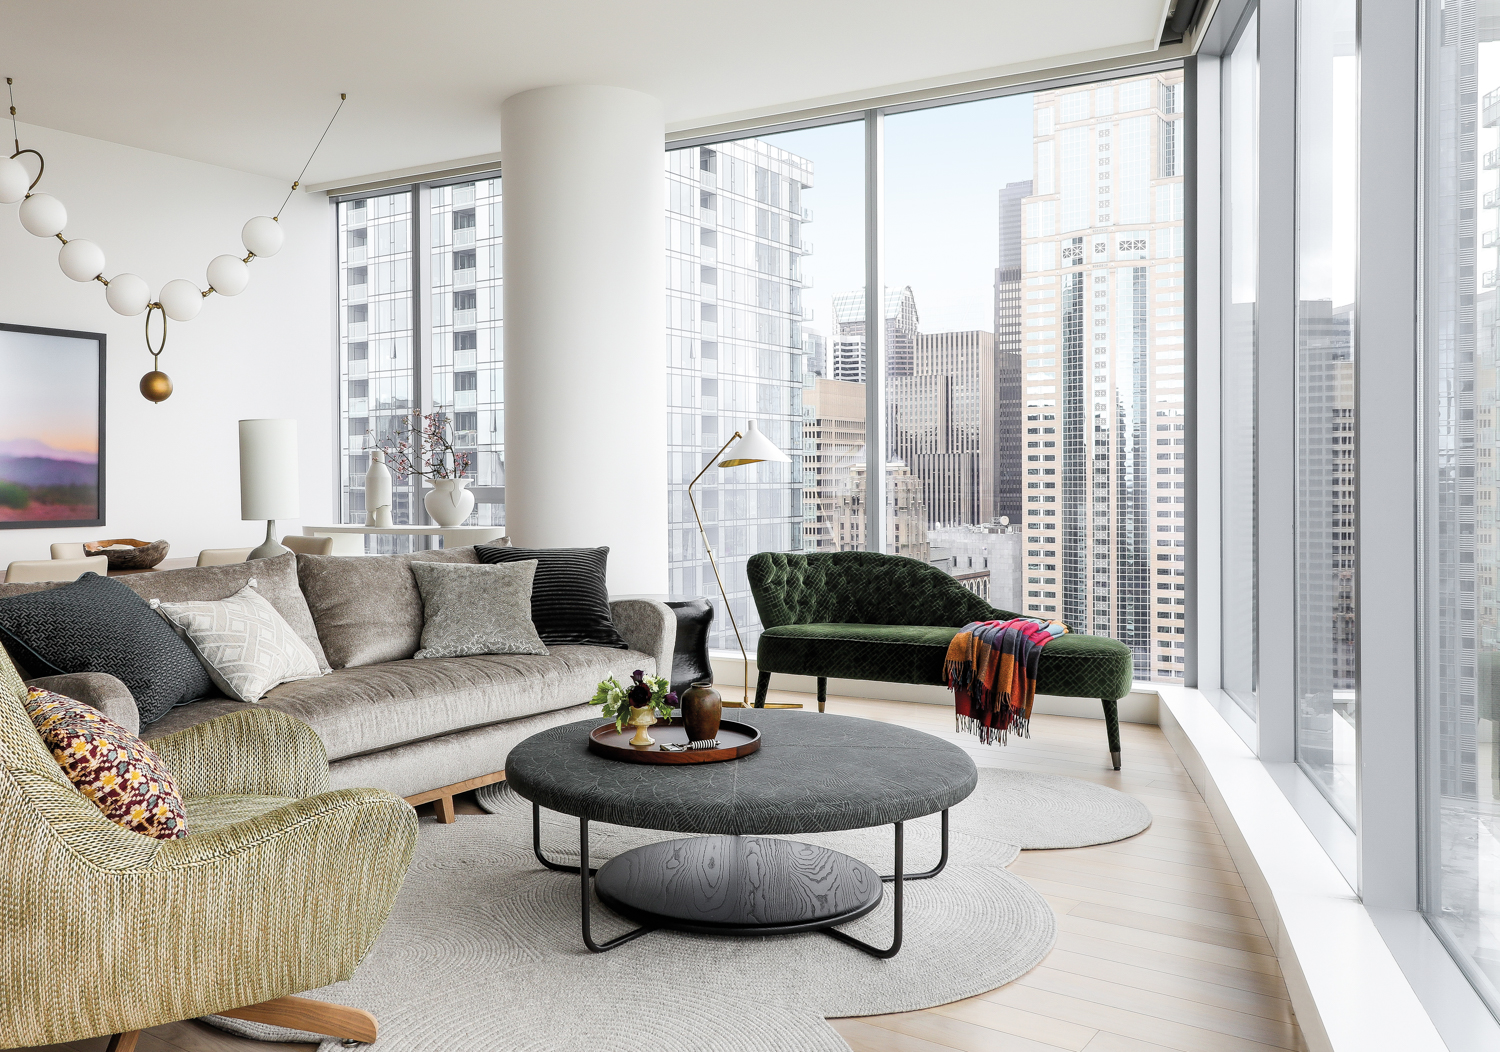 Tour A Serene Seattle High Rise That Puts The Focus On Nature